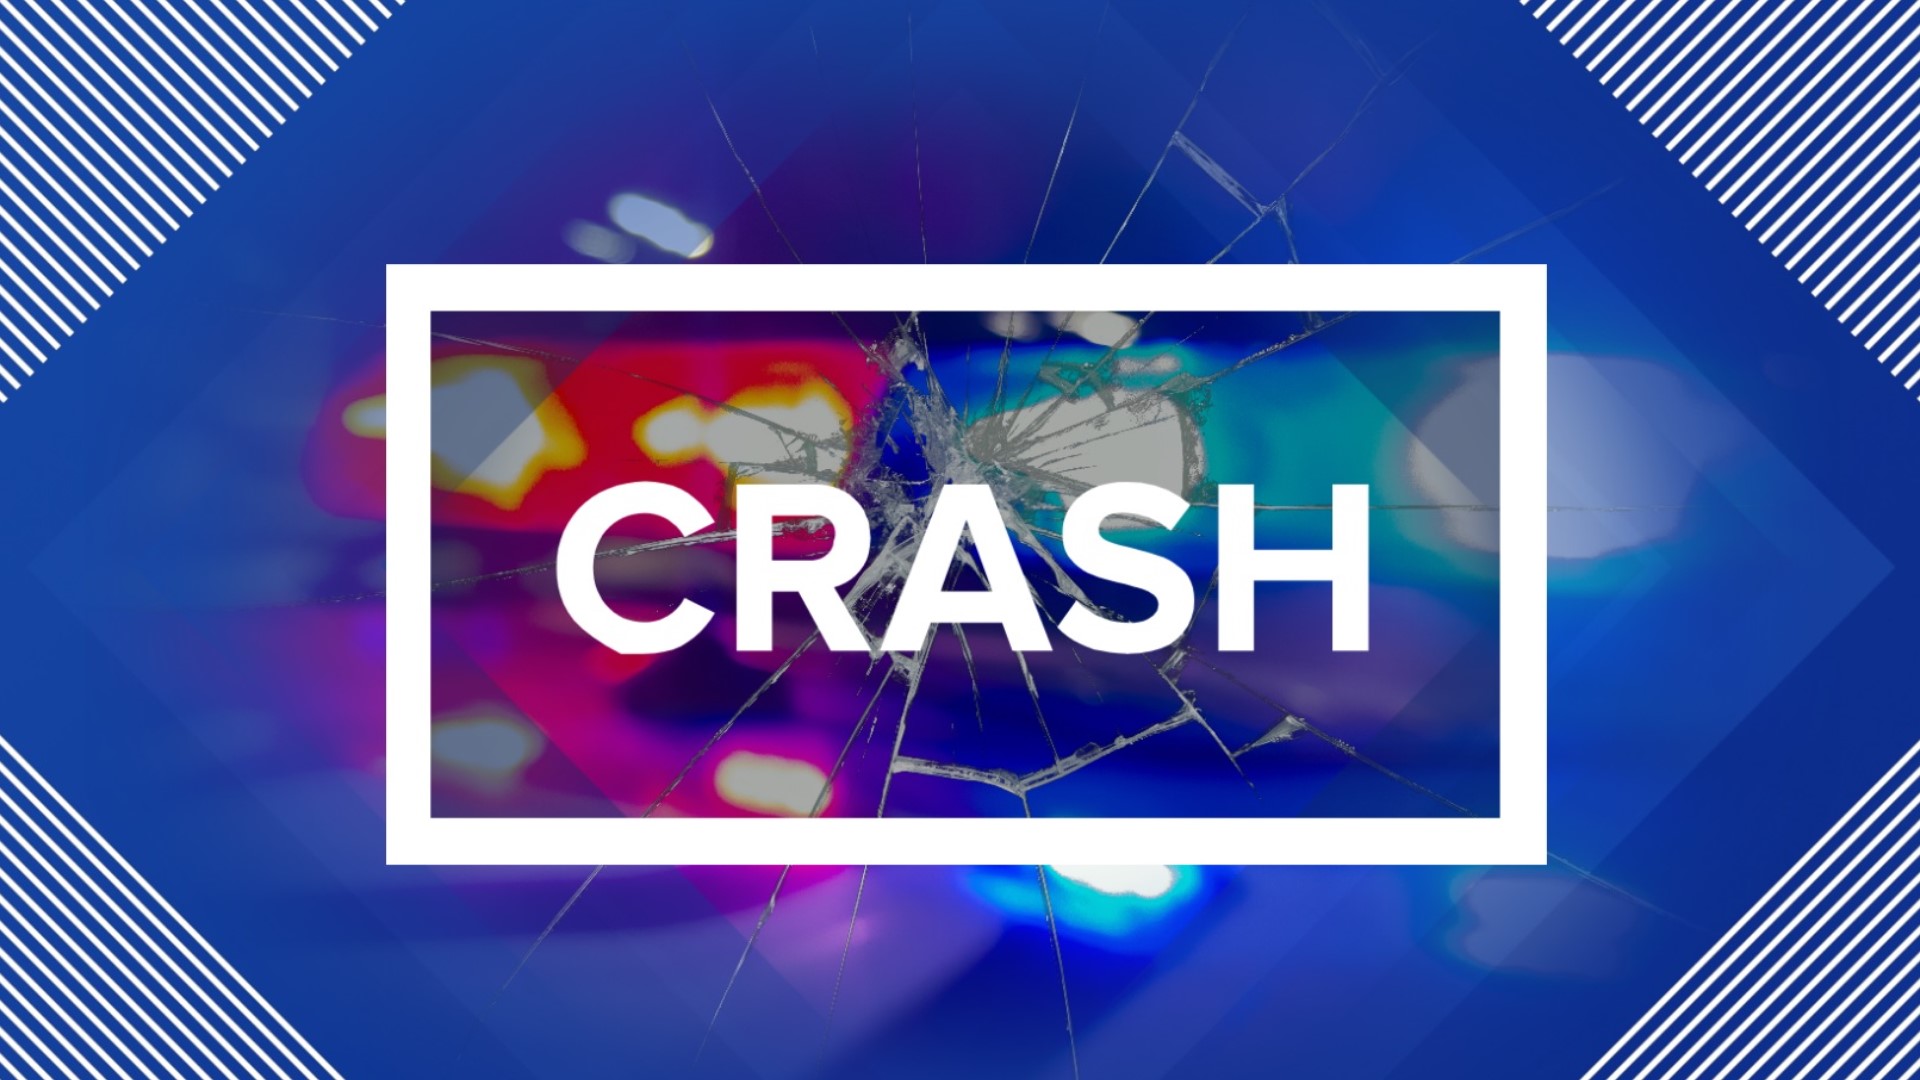 The intersection of County roads 16 and C in Clinton Twp. is closed for about one mile in all directions. It is currently unknown if anyone is injured in the crash.